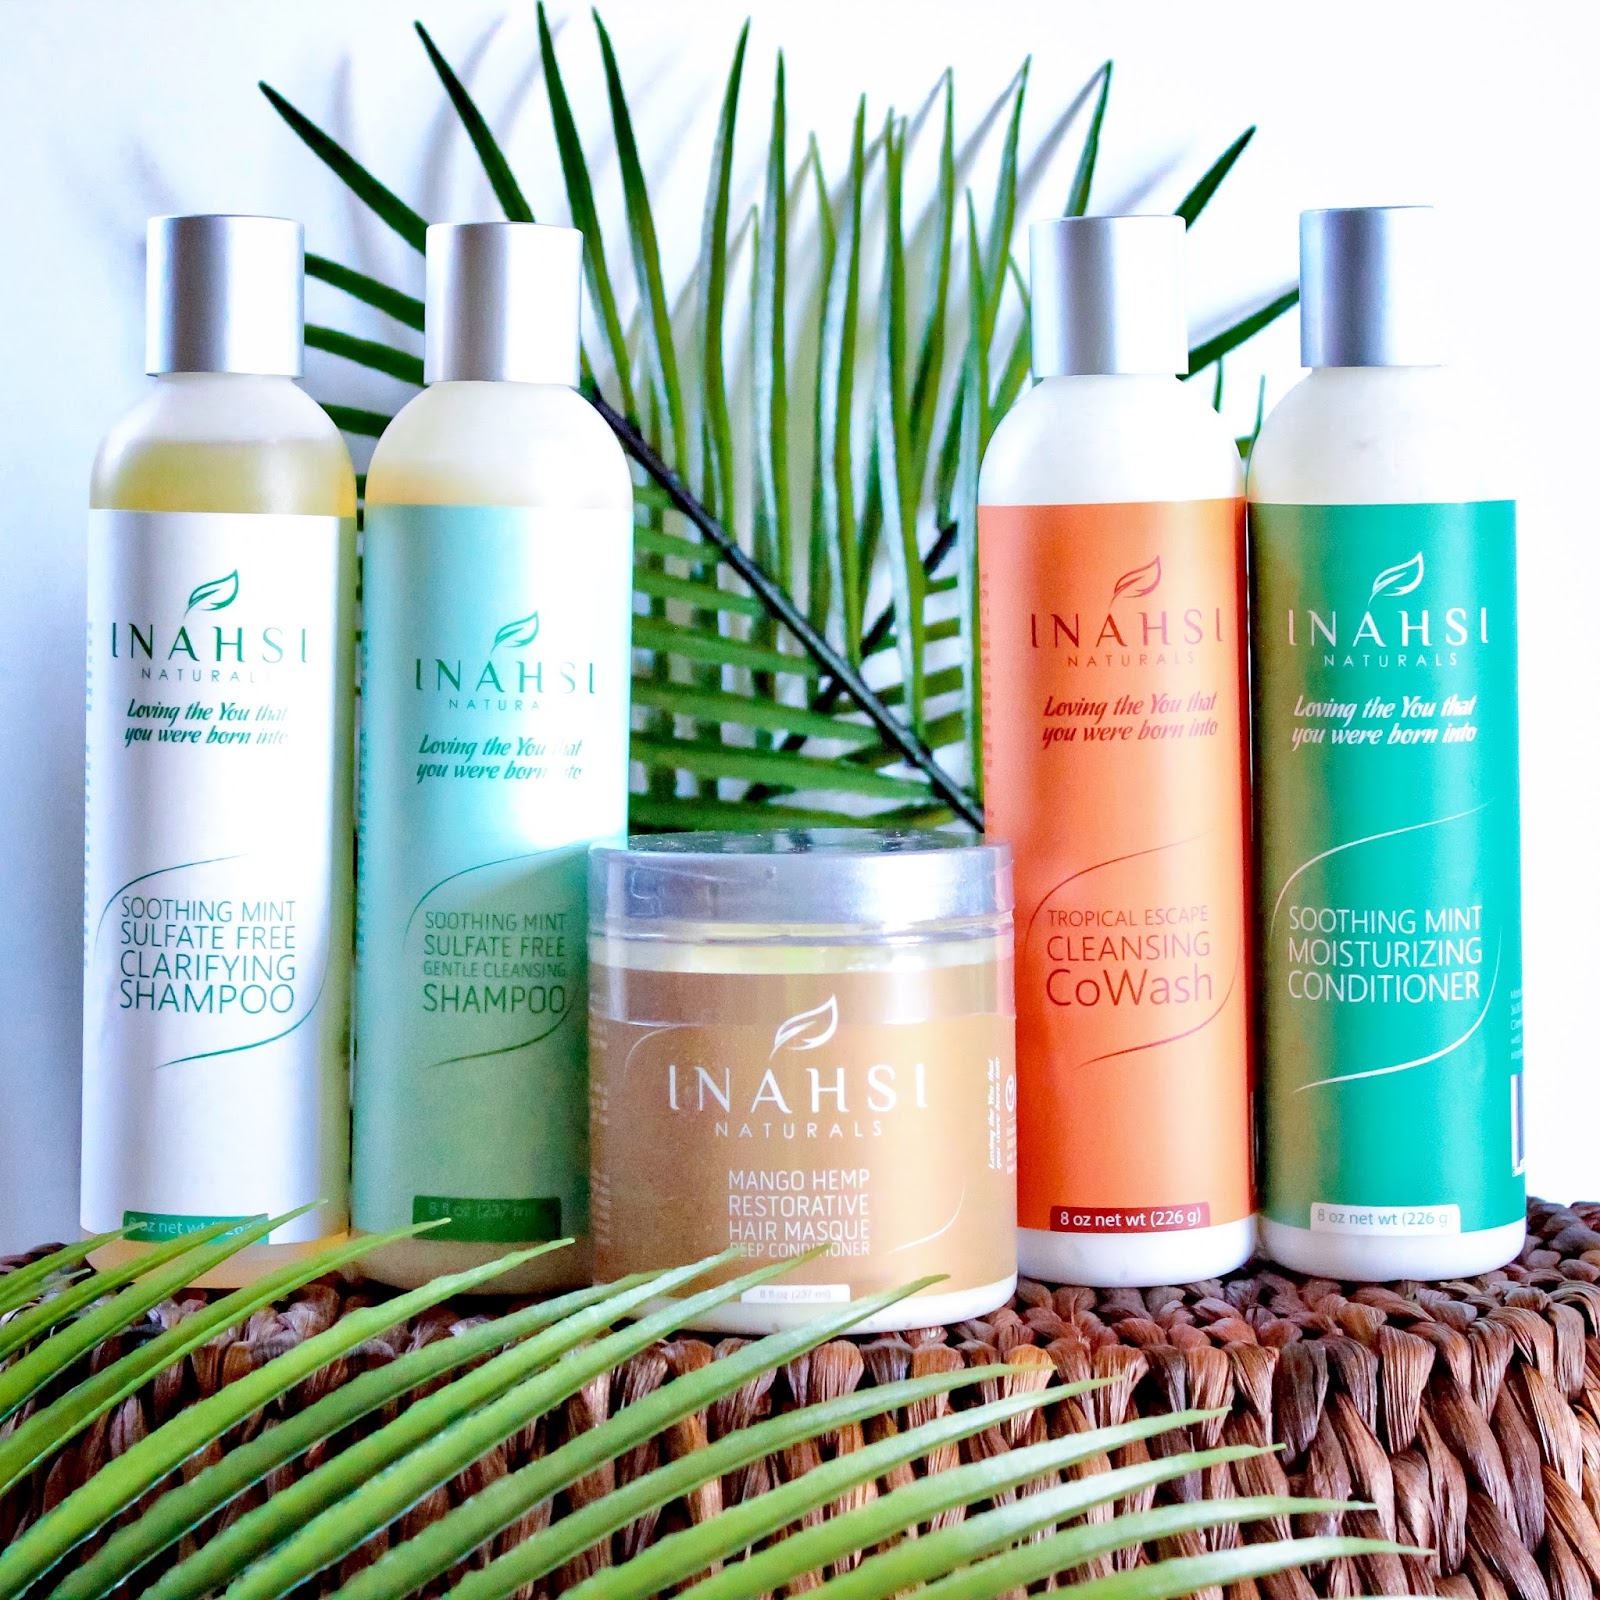 udvide søm dynamisk Co-Washing, Shampooing, and Clarifying - What's the Difference, and Are  They Necessary? featuring Inahsi Naturals | The Mane Objective